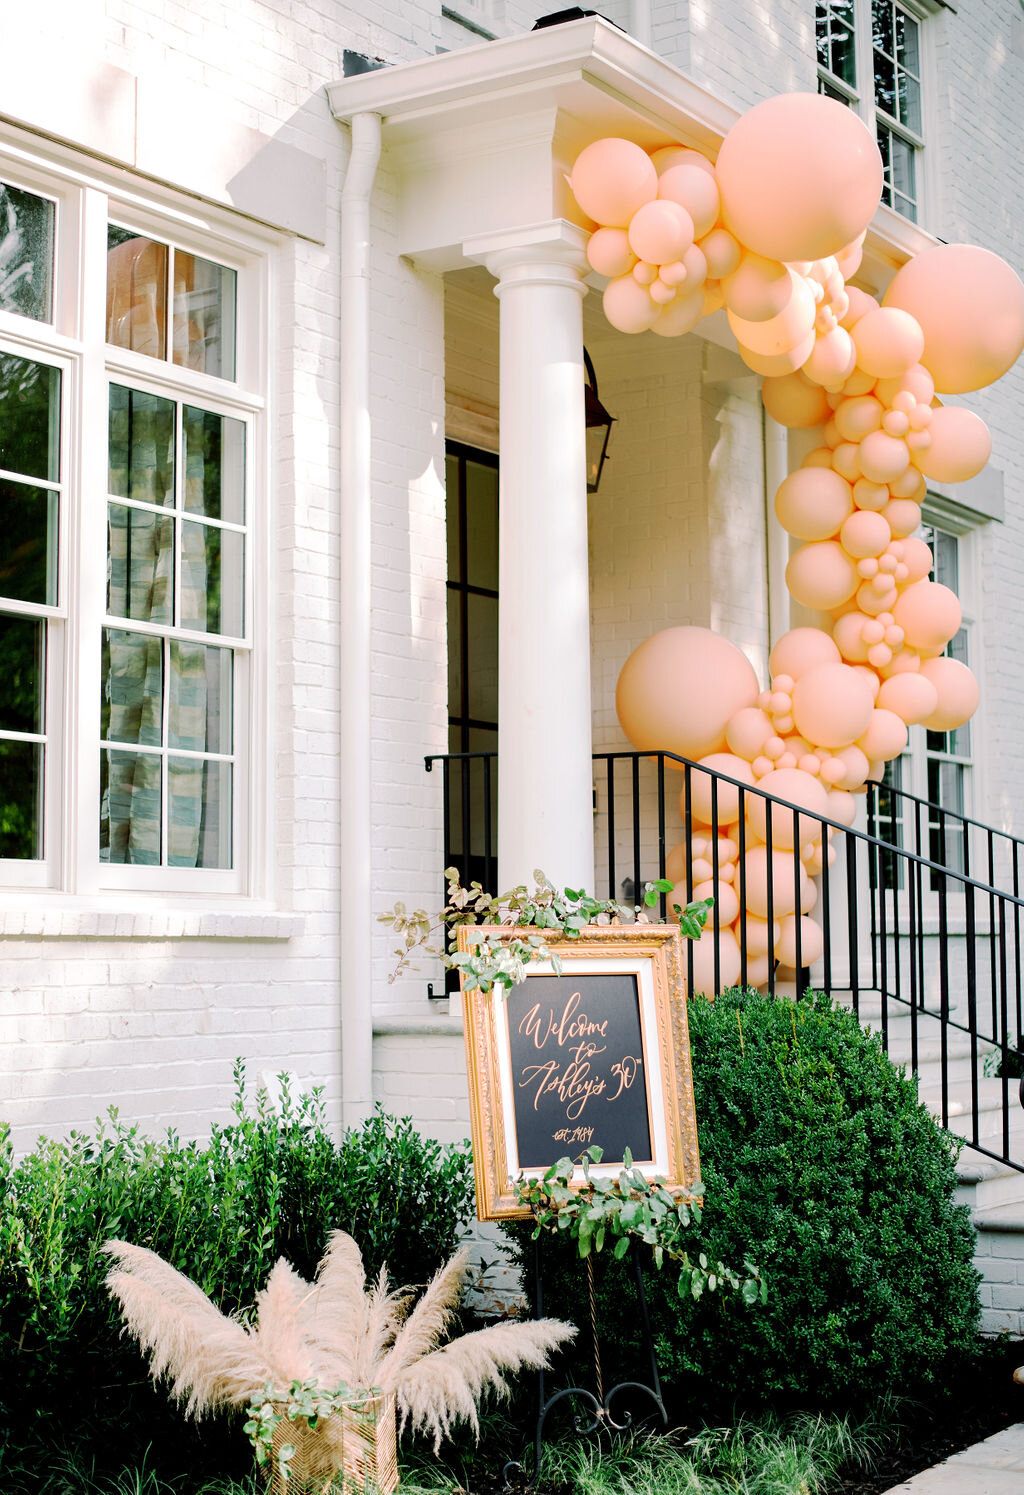 Welcome Sign and Balloon Installation | Simply Charming Socials | Atlanta Event Planner